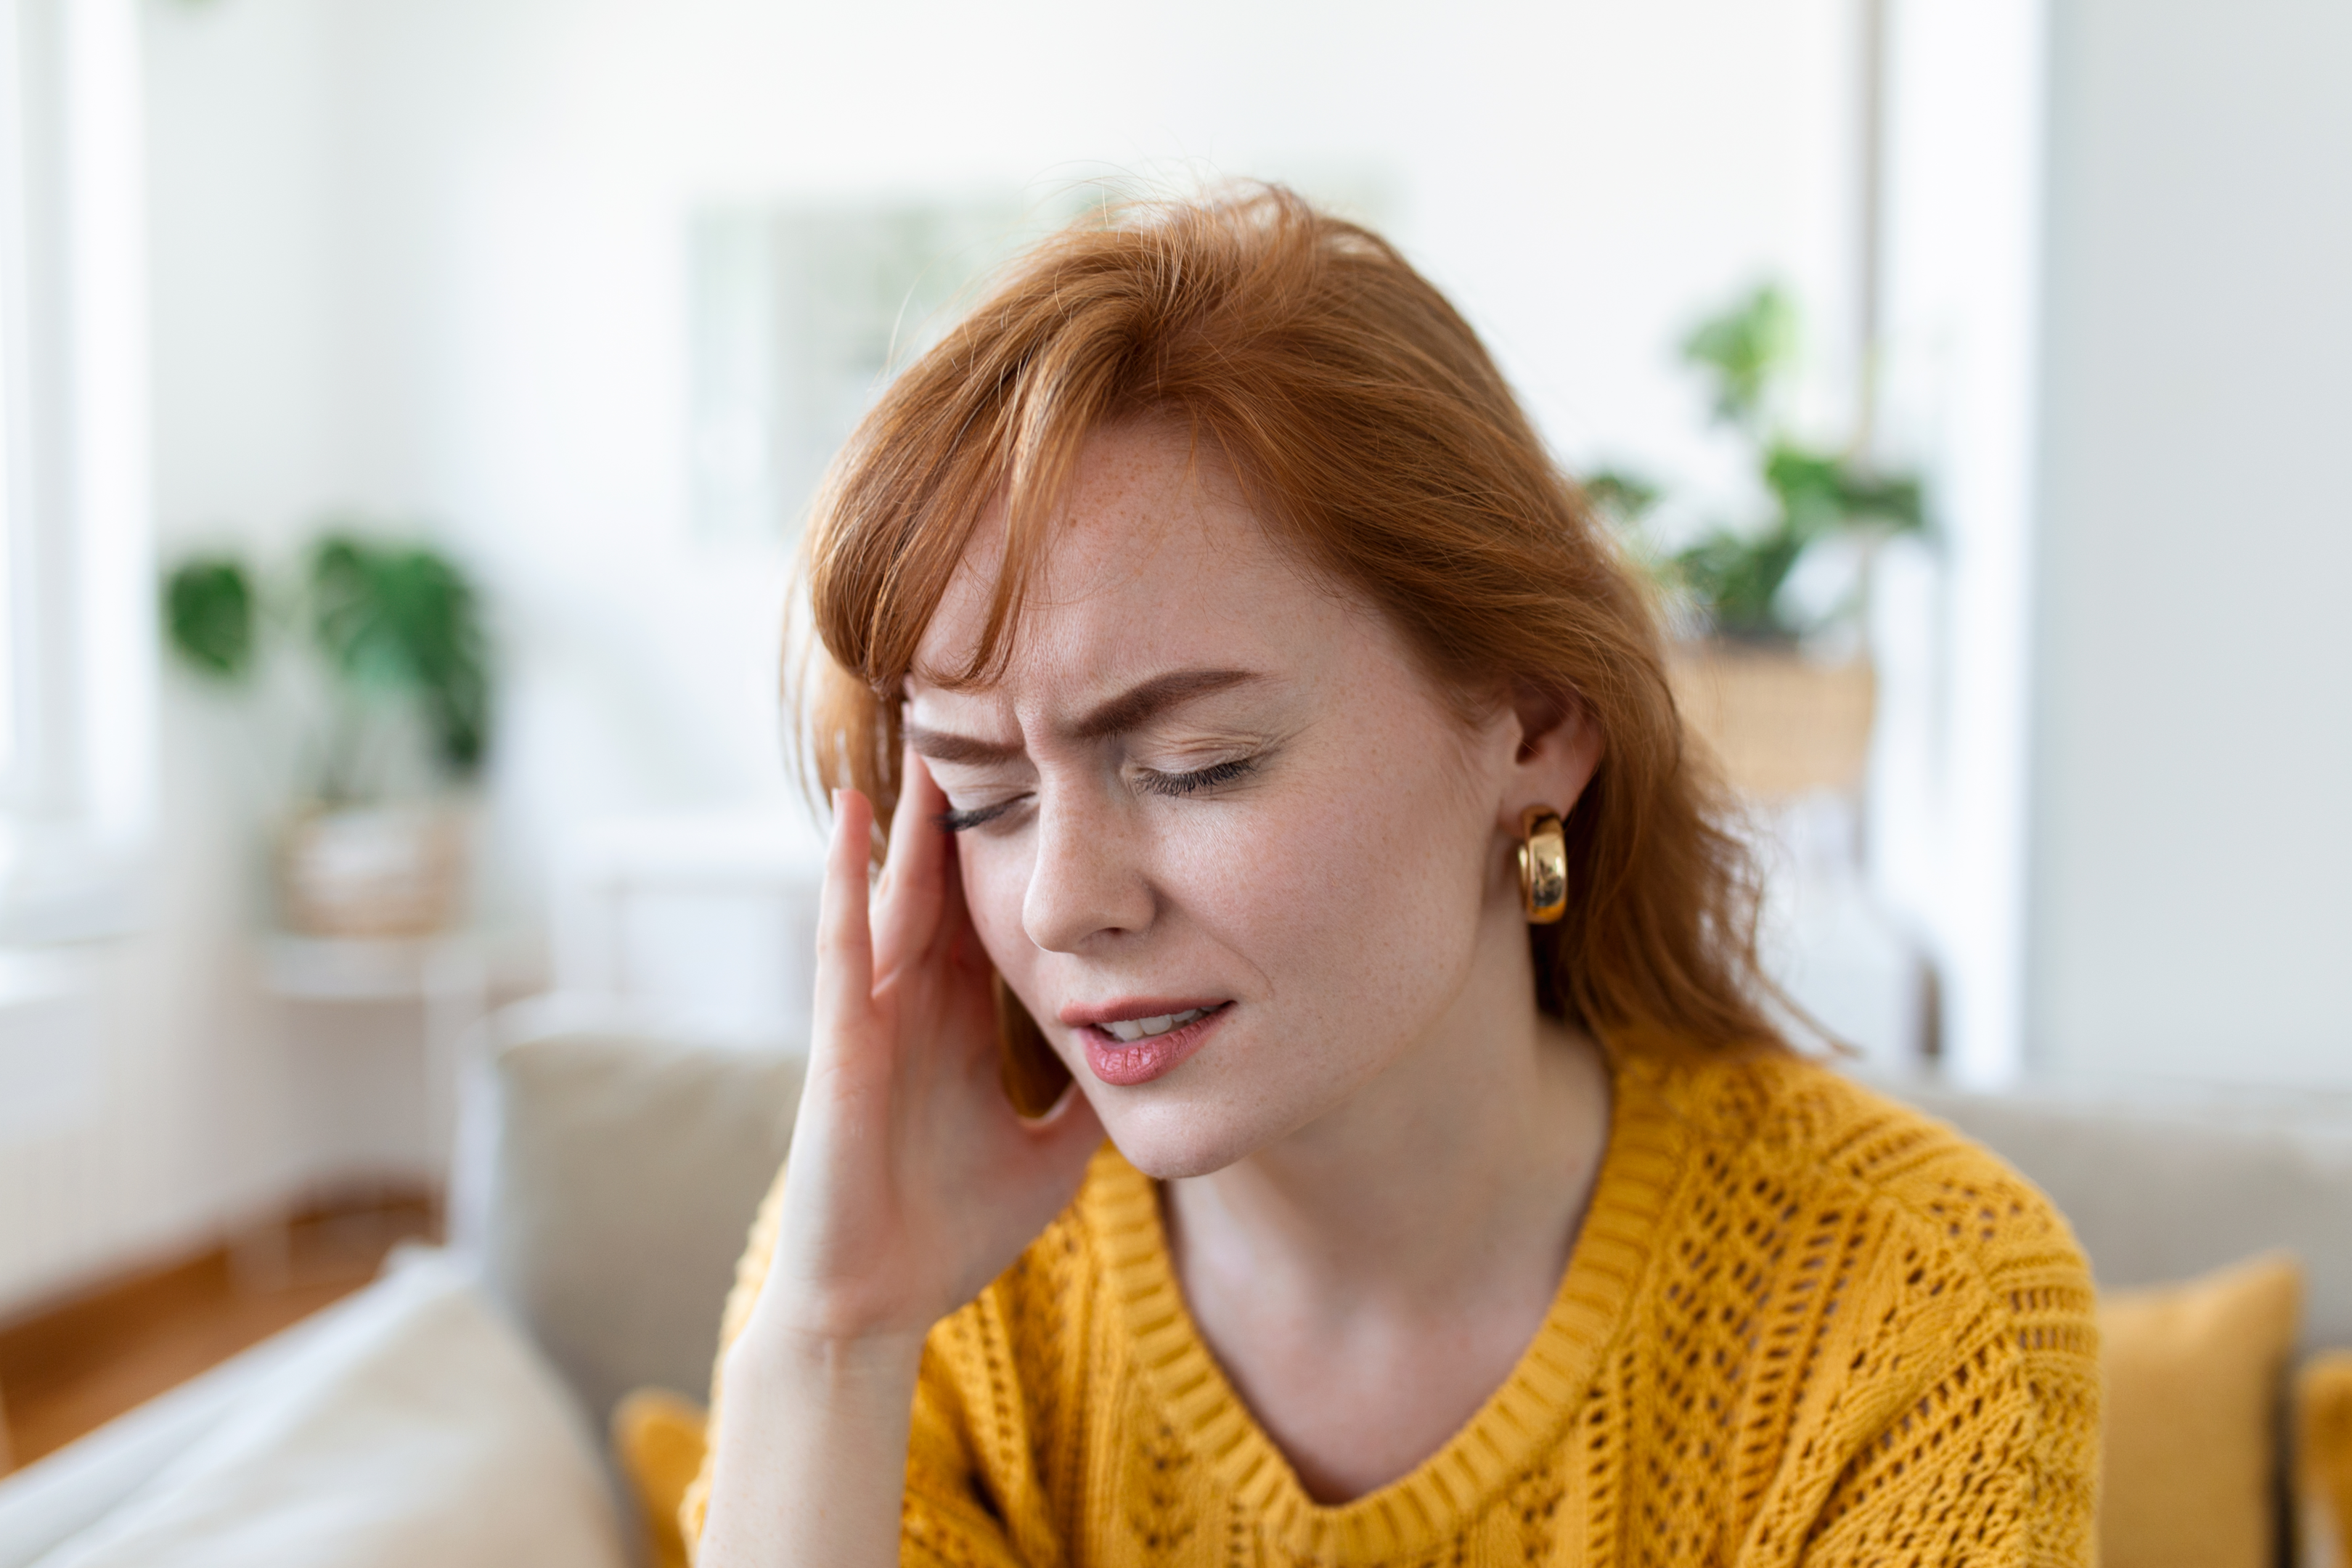 migraine symptoms can include throbbing pain headache pain, sensitivity to light, migraine with aura, and be caused by several migraine triggers 